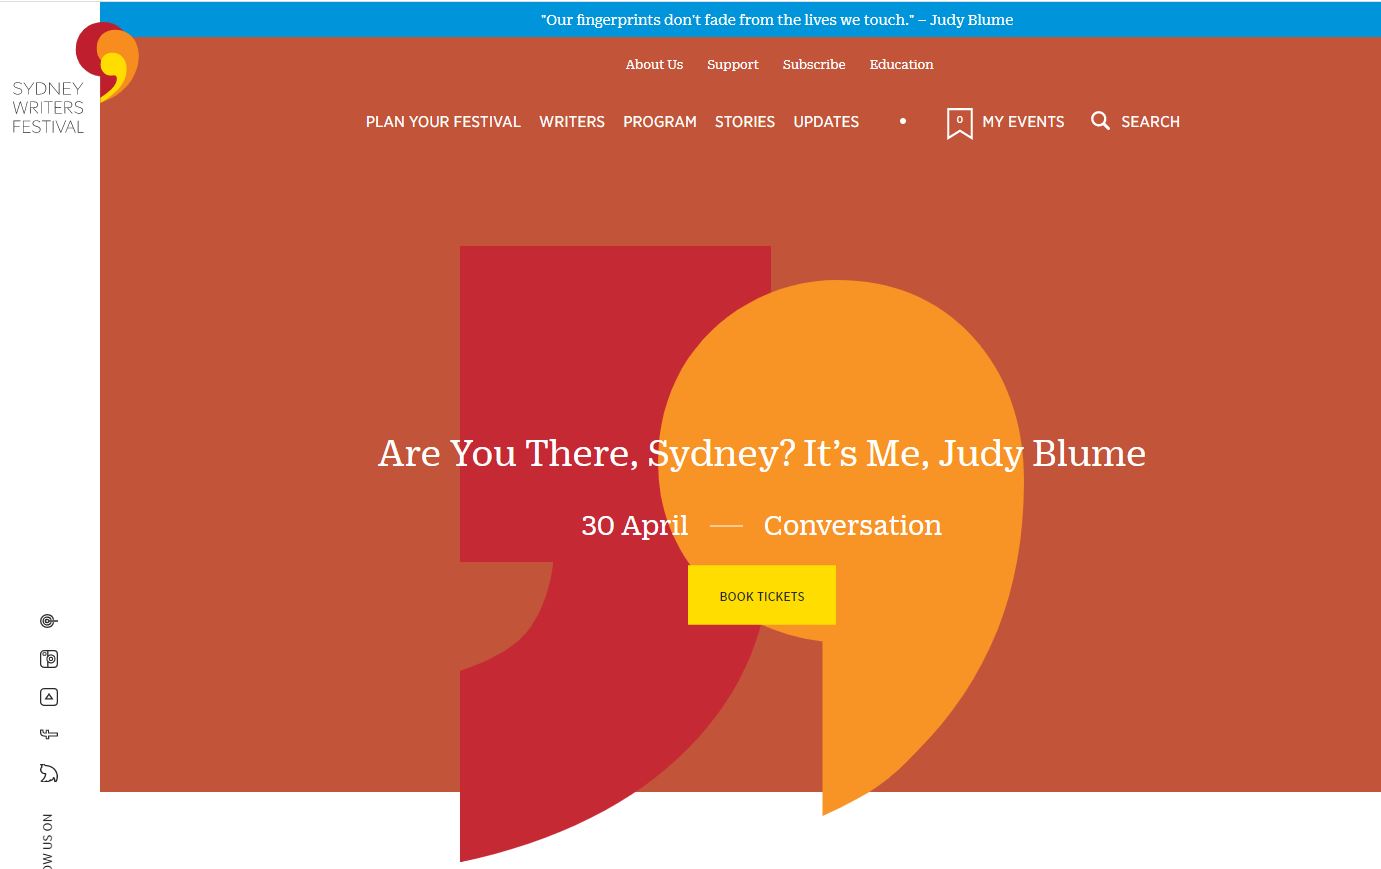 Judy (virtually) joined Sydney Writers’ Festival, April 29 – US date (April 30 – Australia date), 2021